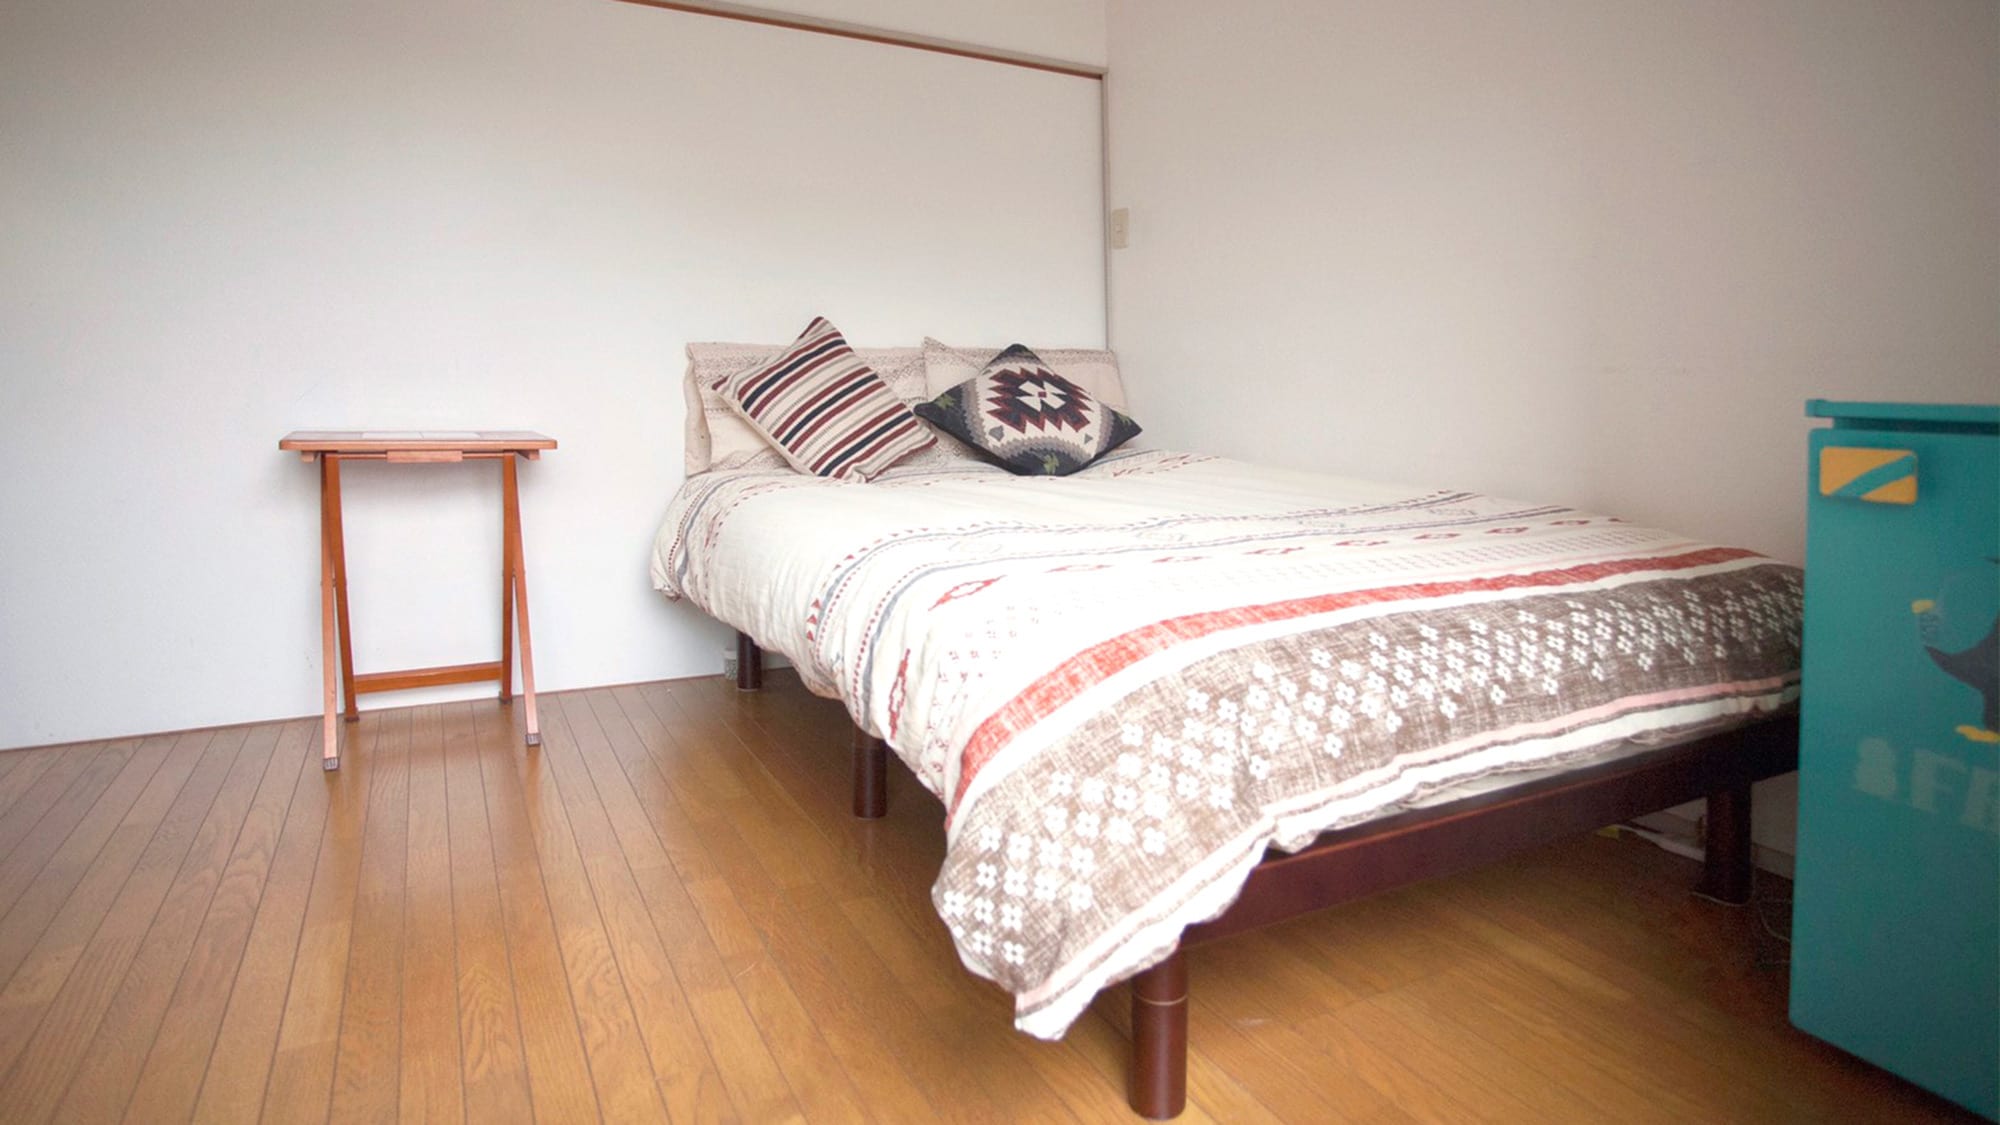 ・ One semi-double bed is installed in the bedroom of the Western-style room.